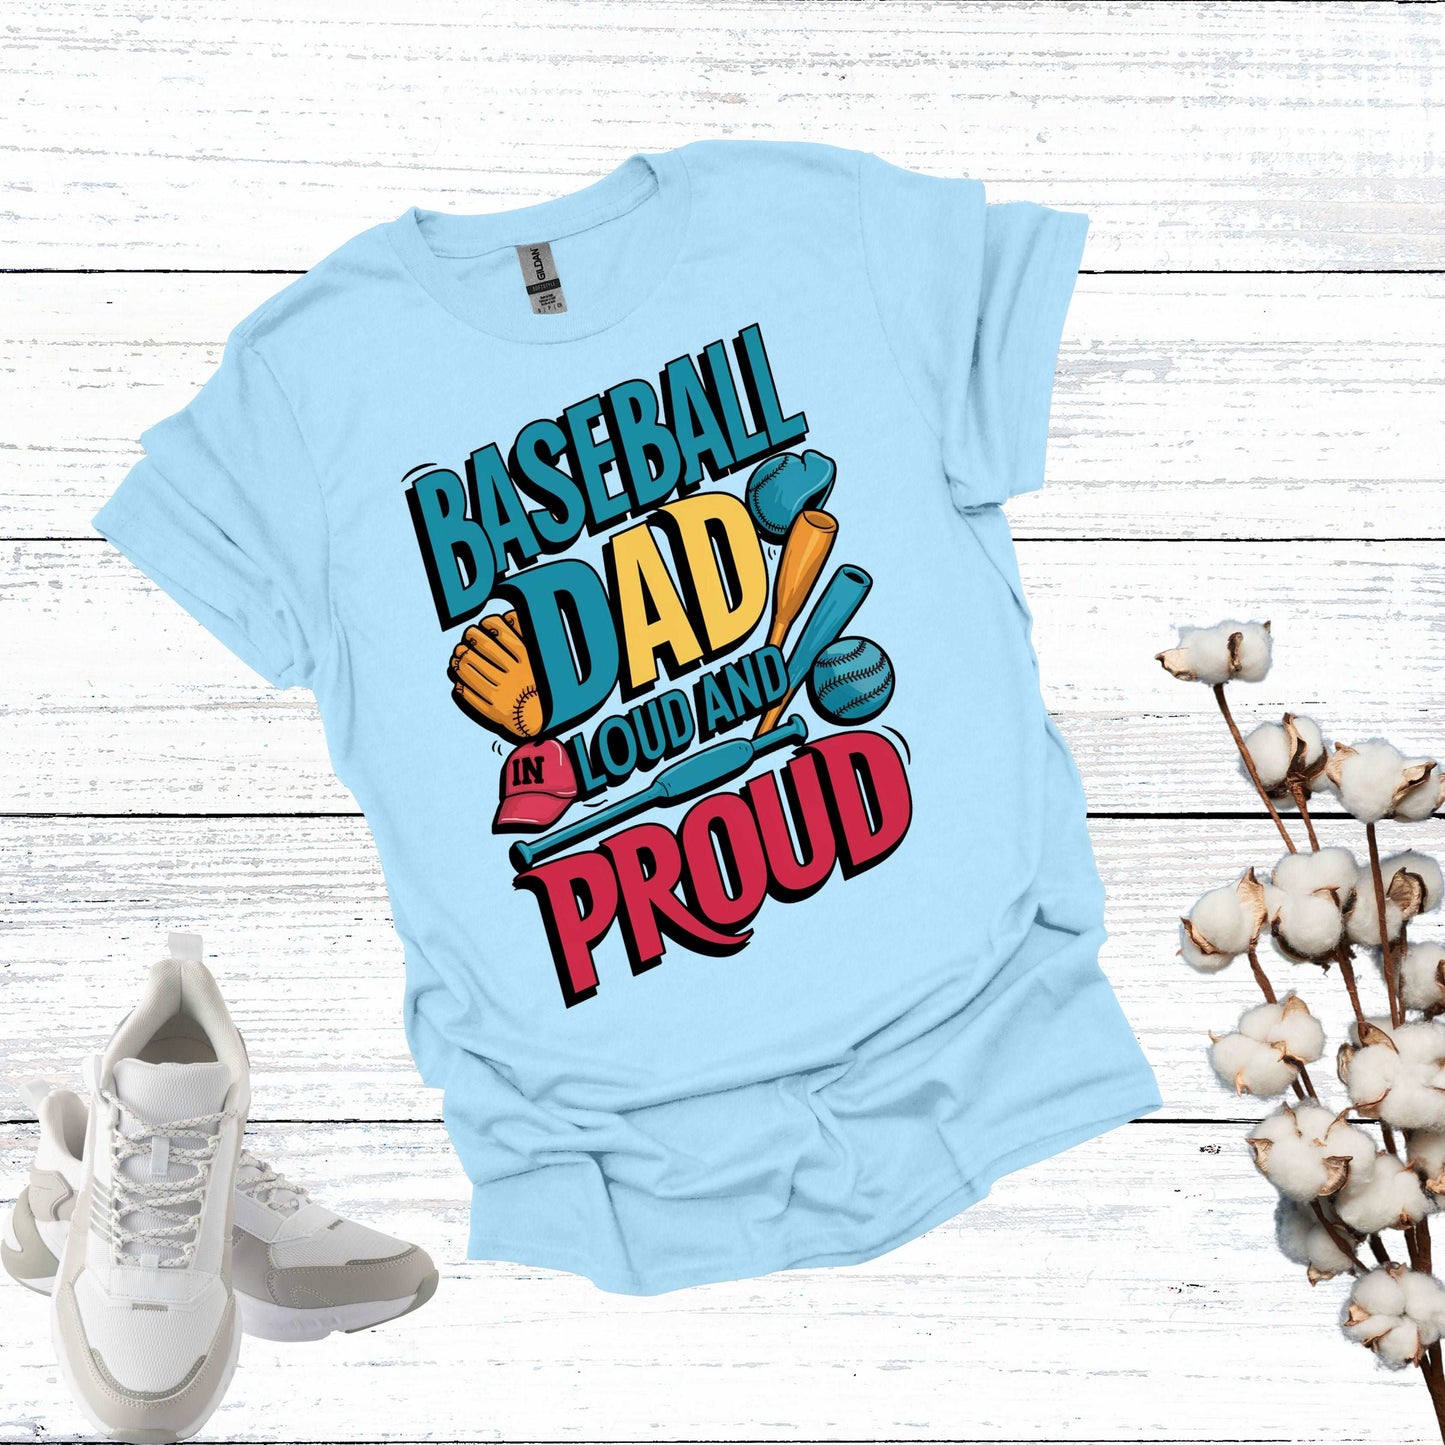 Baseball Dad Light Blue Shirt - Fathers are Loud and Proud